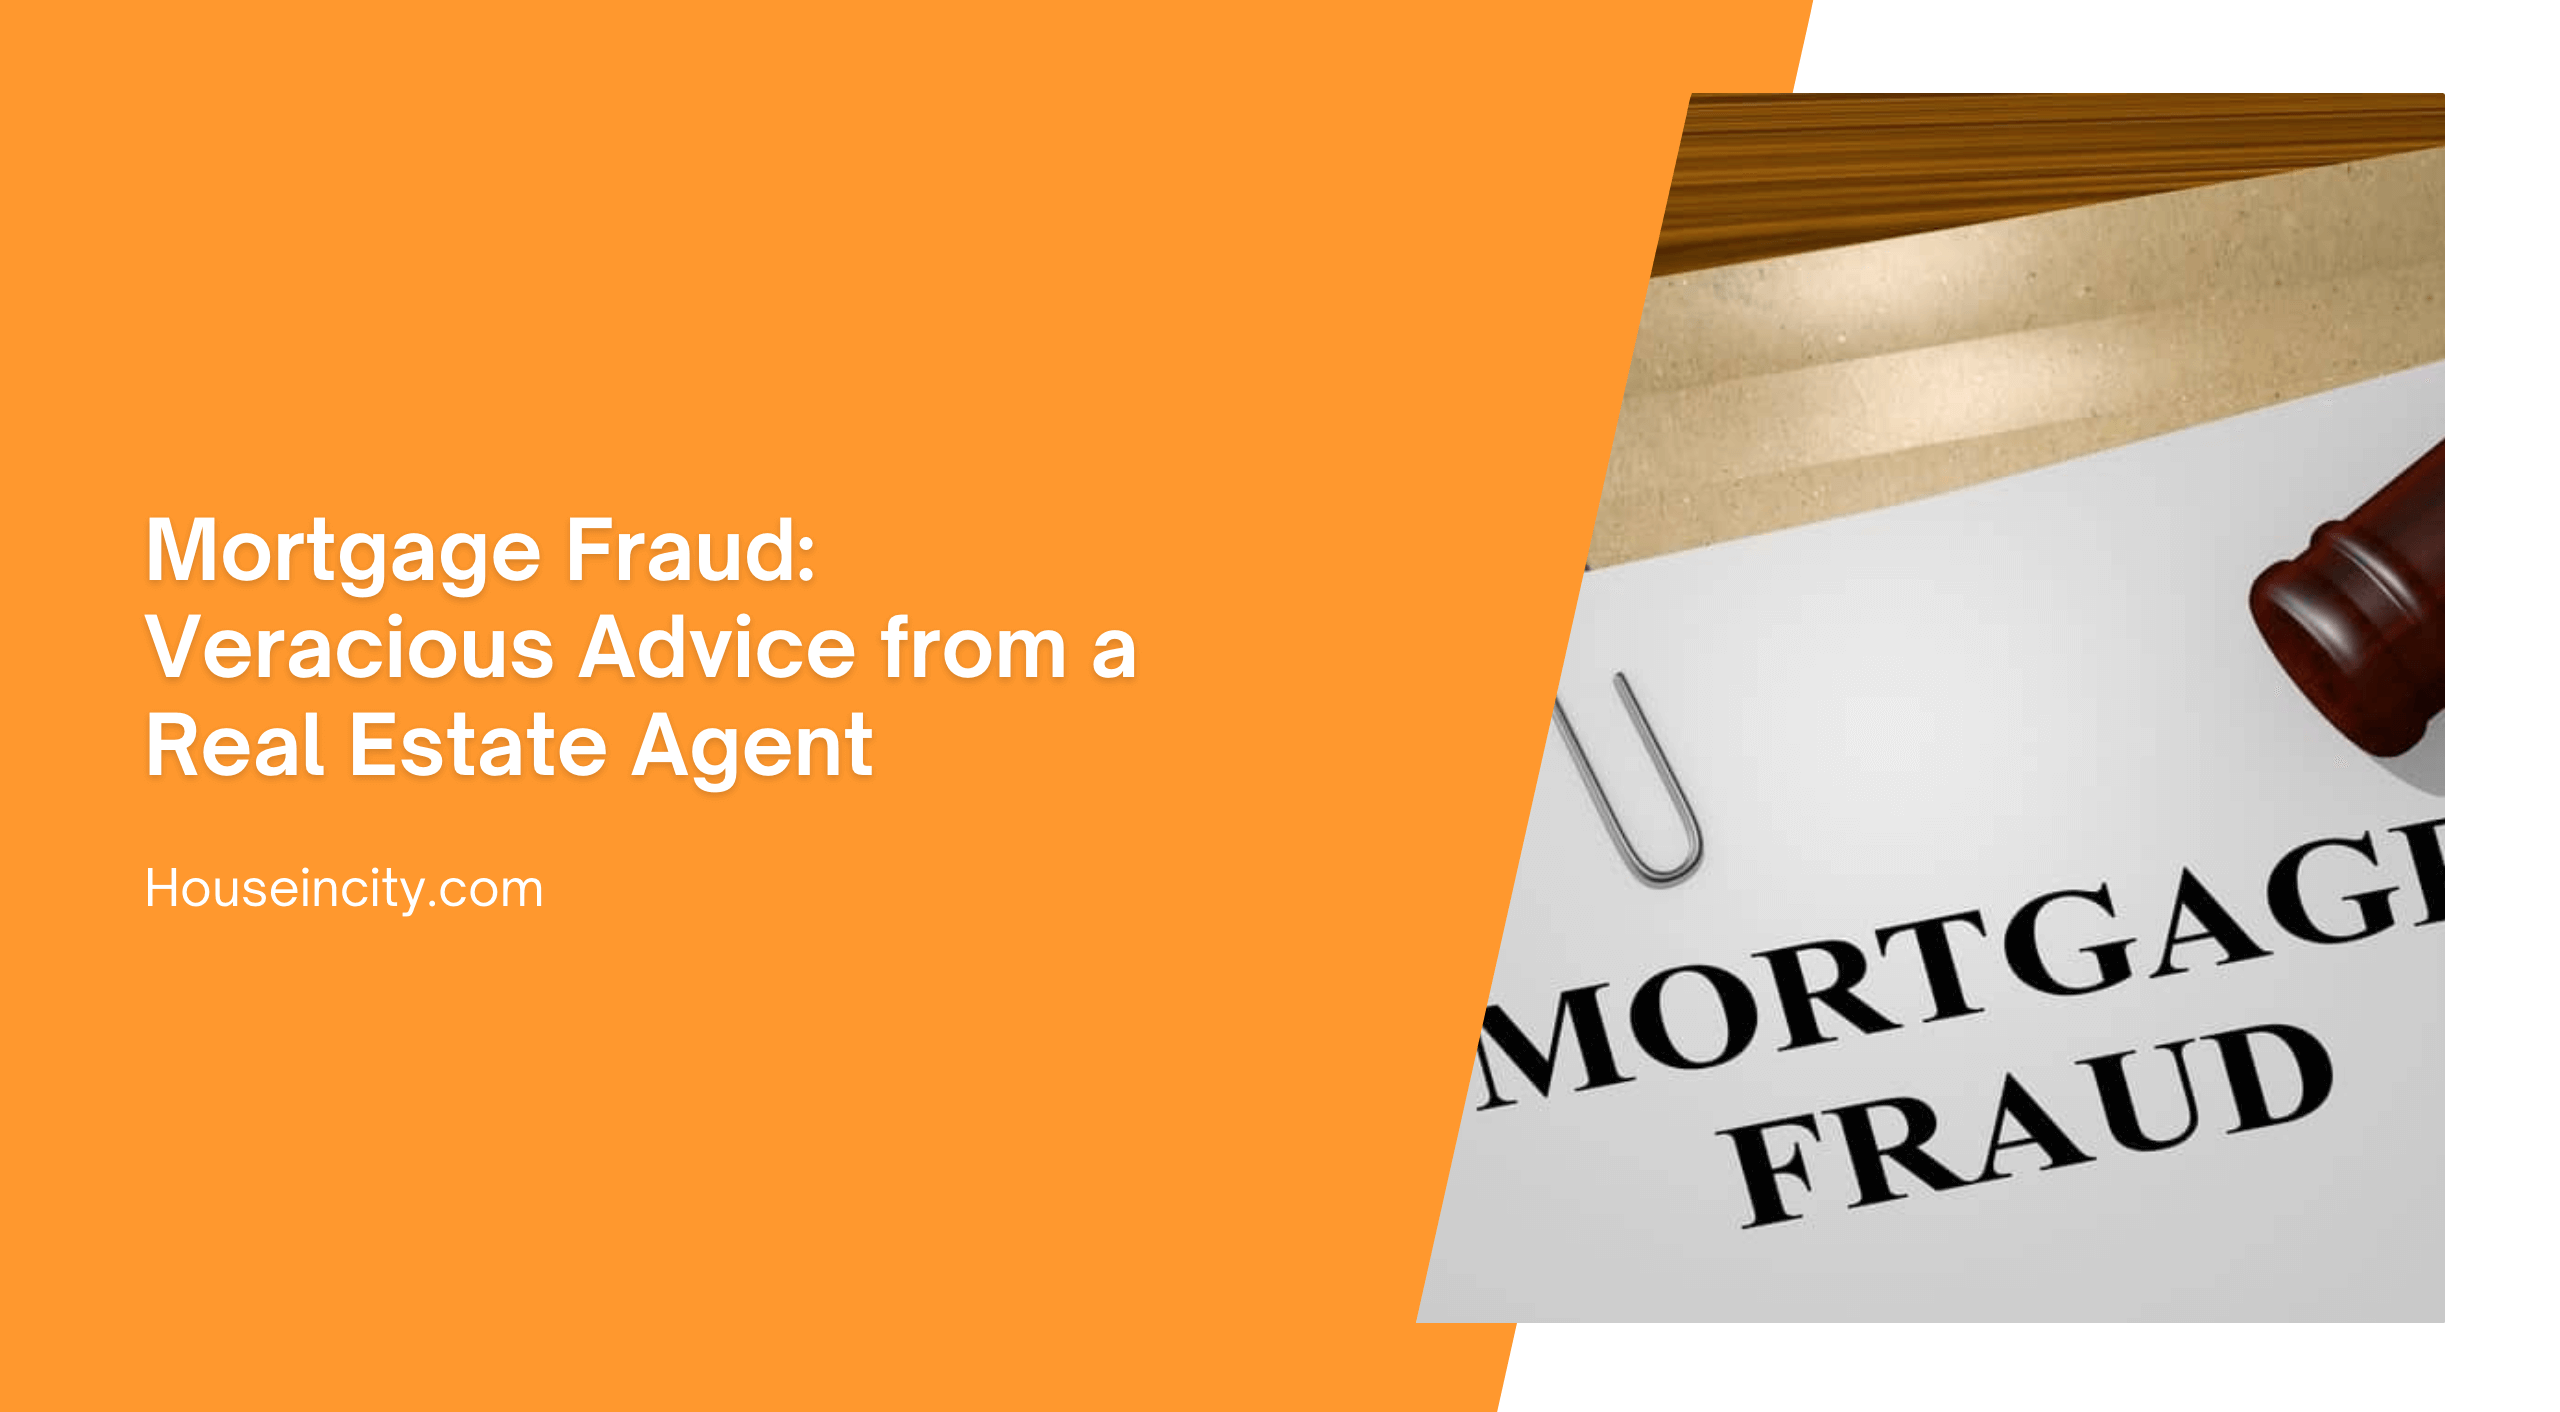 Mortgage Fraud: Veracious Advice from a Real Estate Agent